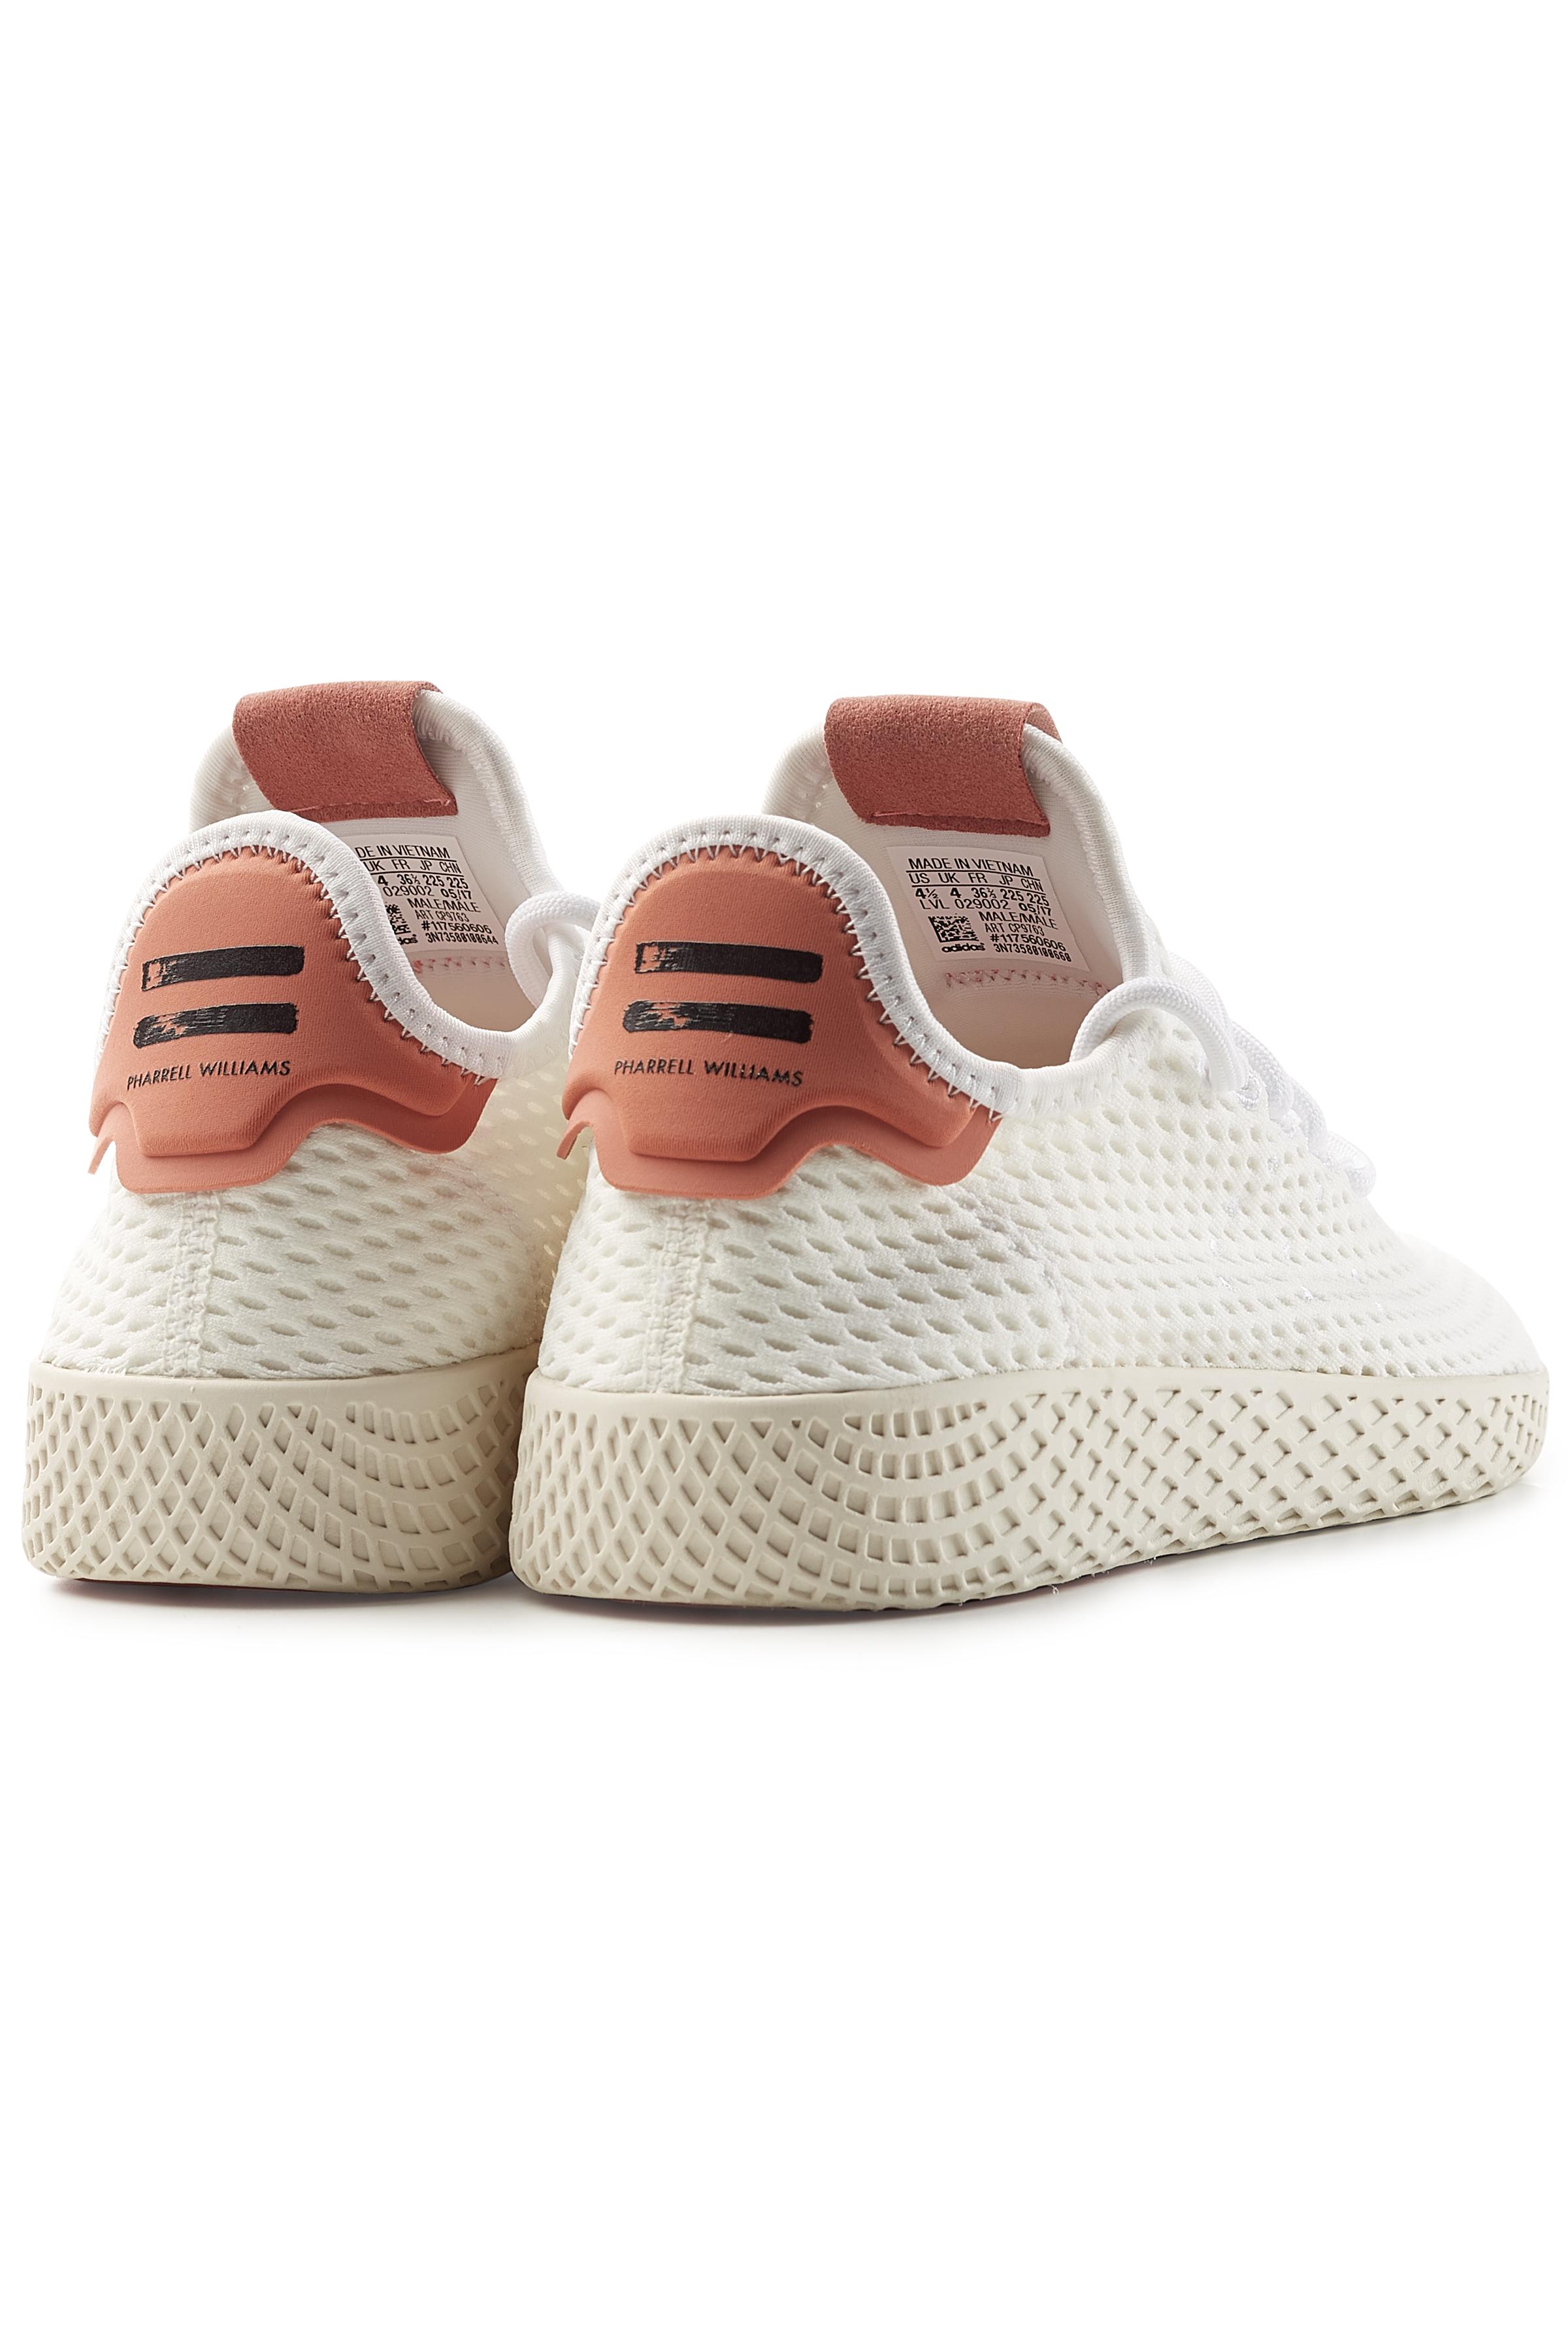 Snooze business Peninsula Adidas shoe by Pharrell Williams now available on Stylebop